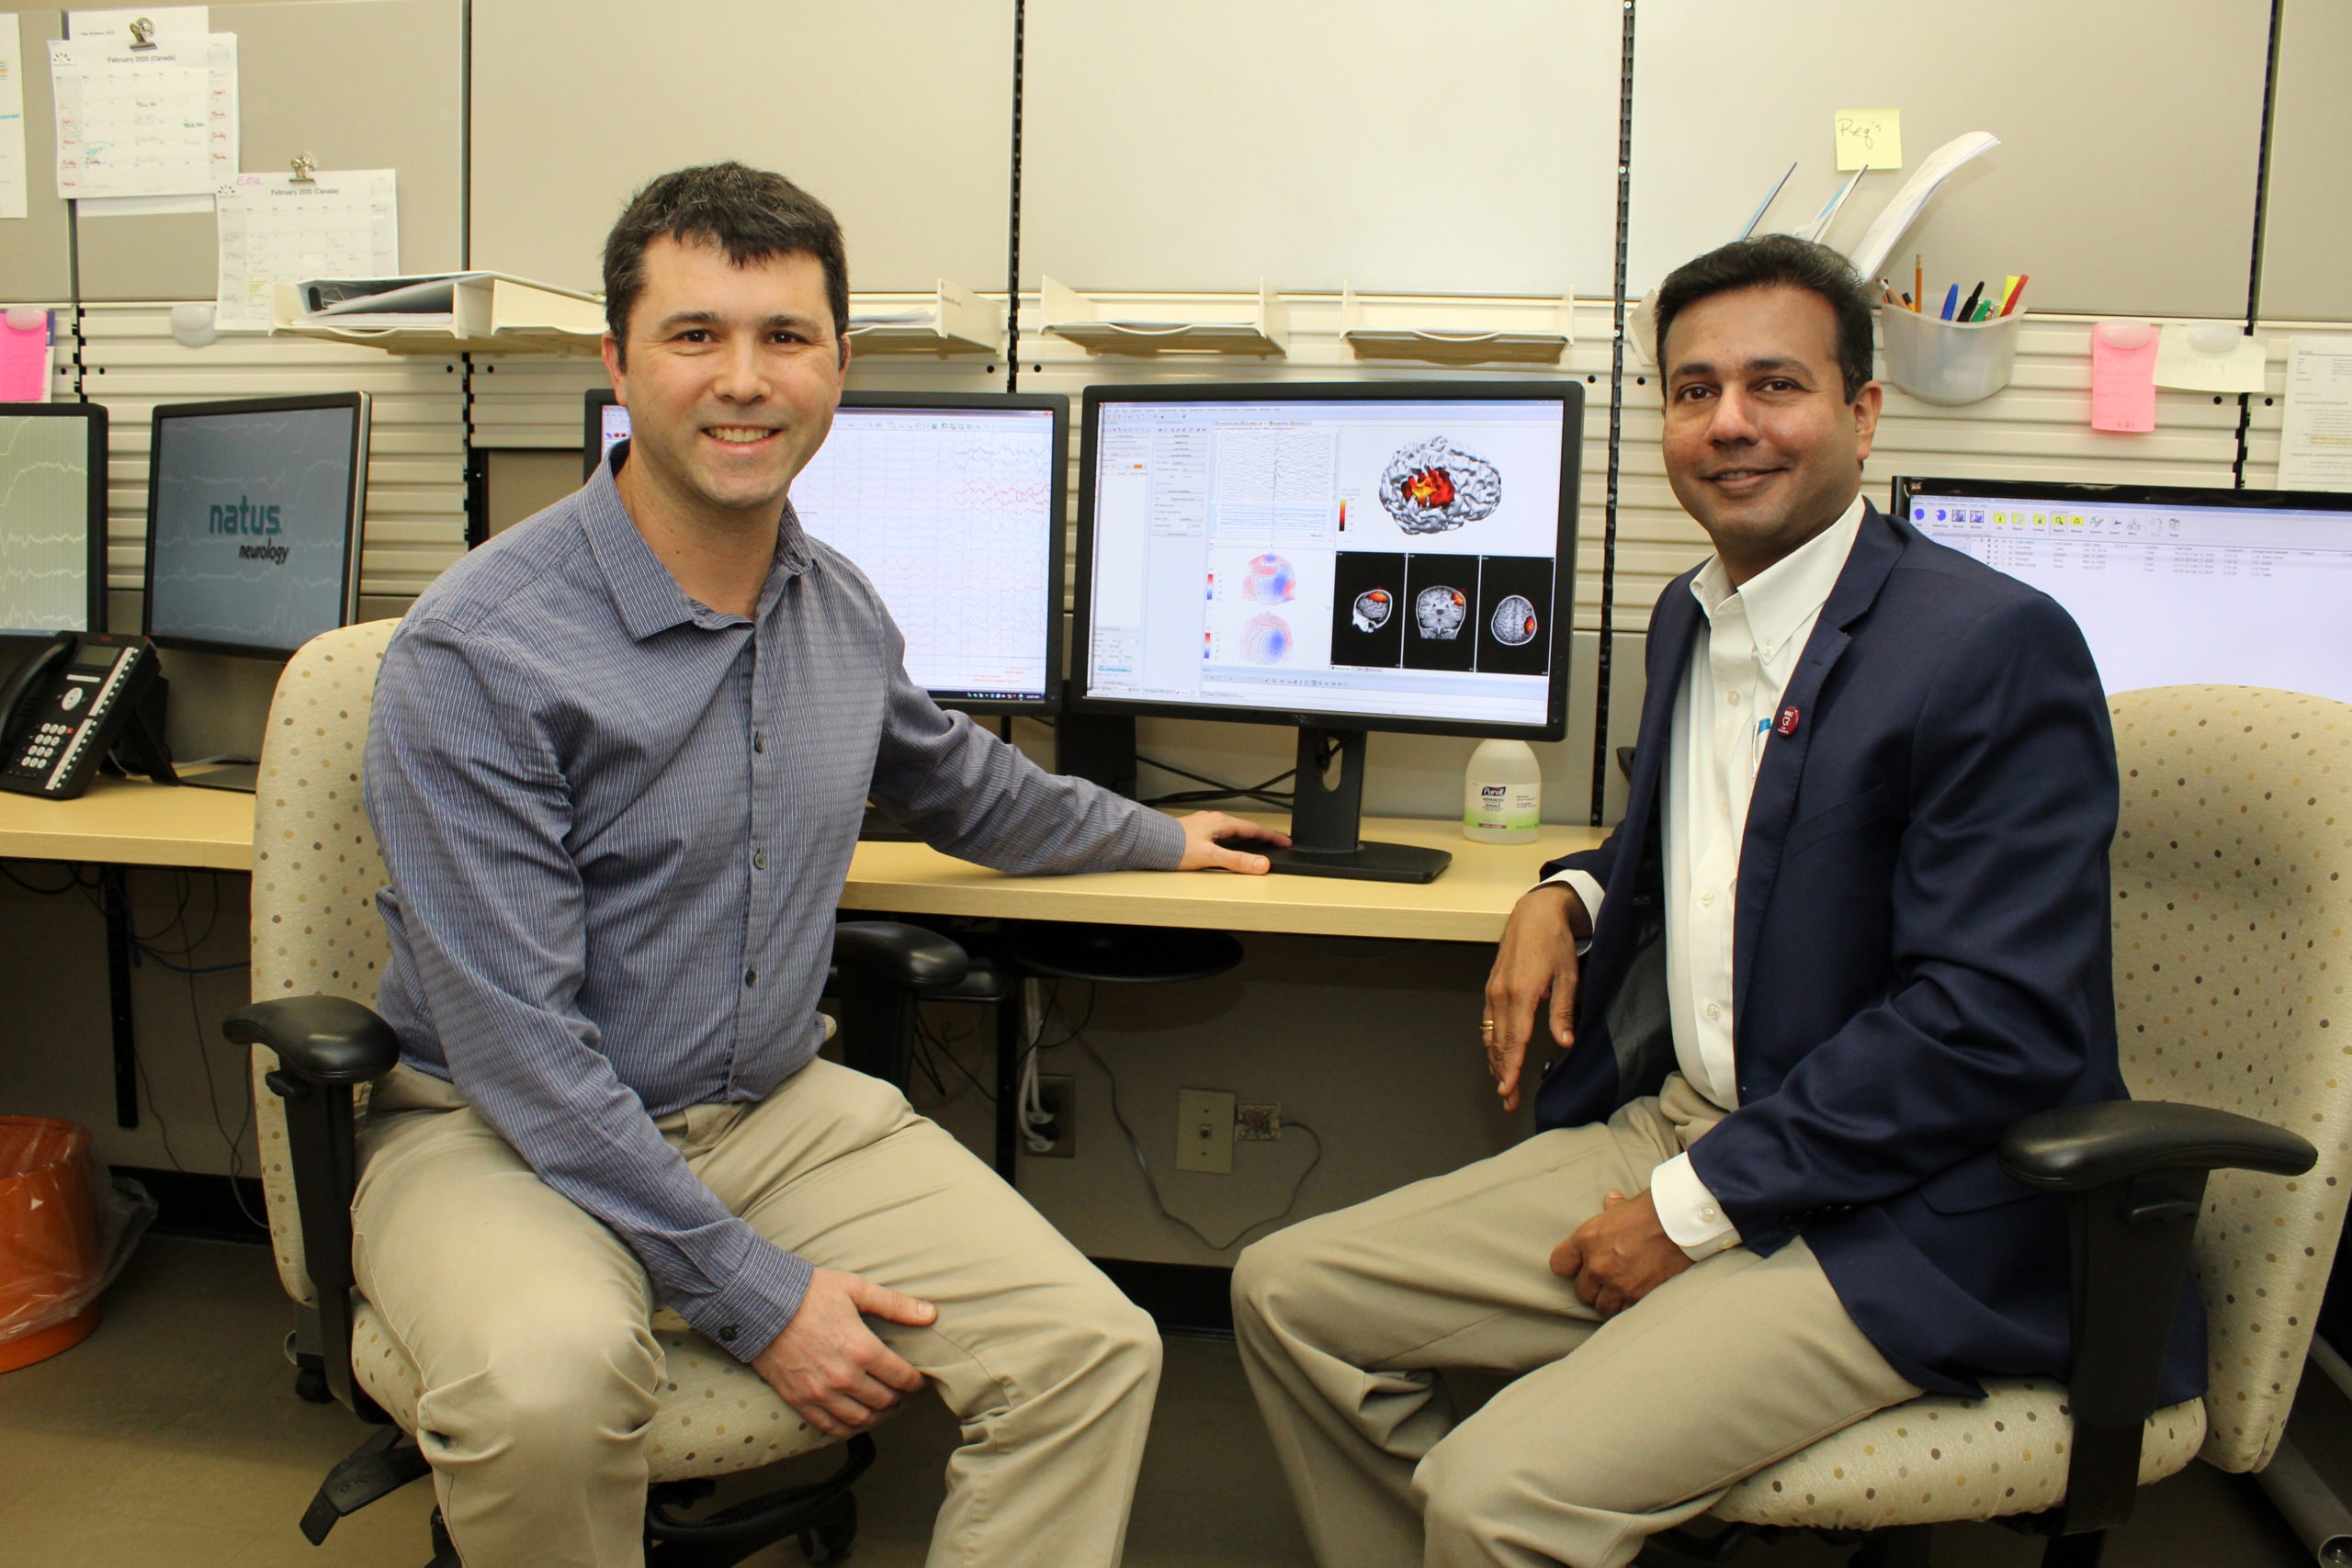 Two neurologists in the Pediatric Epilepsy Clinic at McMaster Children’s Hospital advocated for special software to improve accuracy of seizure location in a patient’s brain as part of a patient’s pre-surgical care.